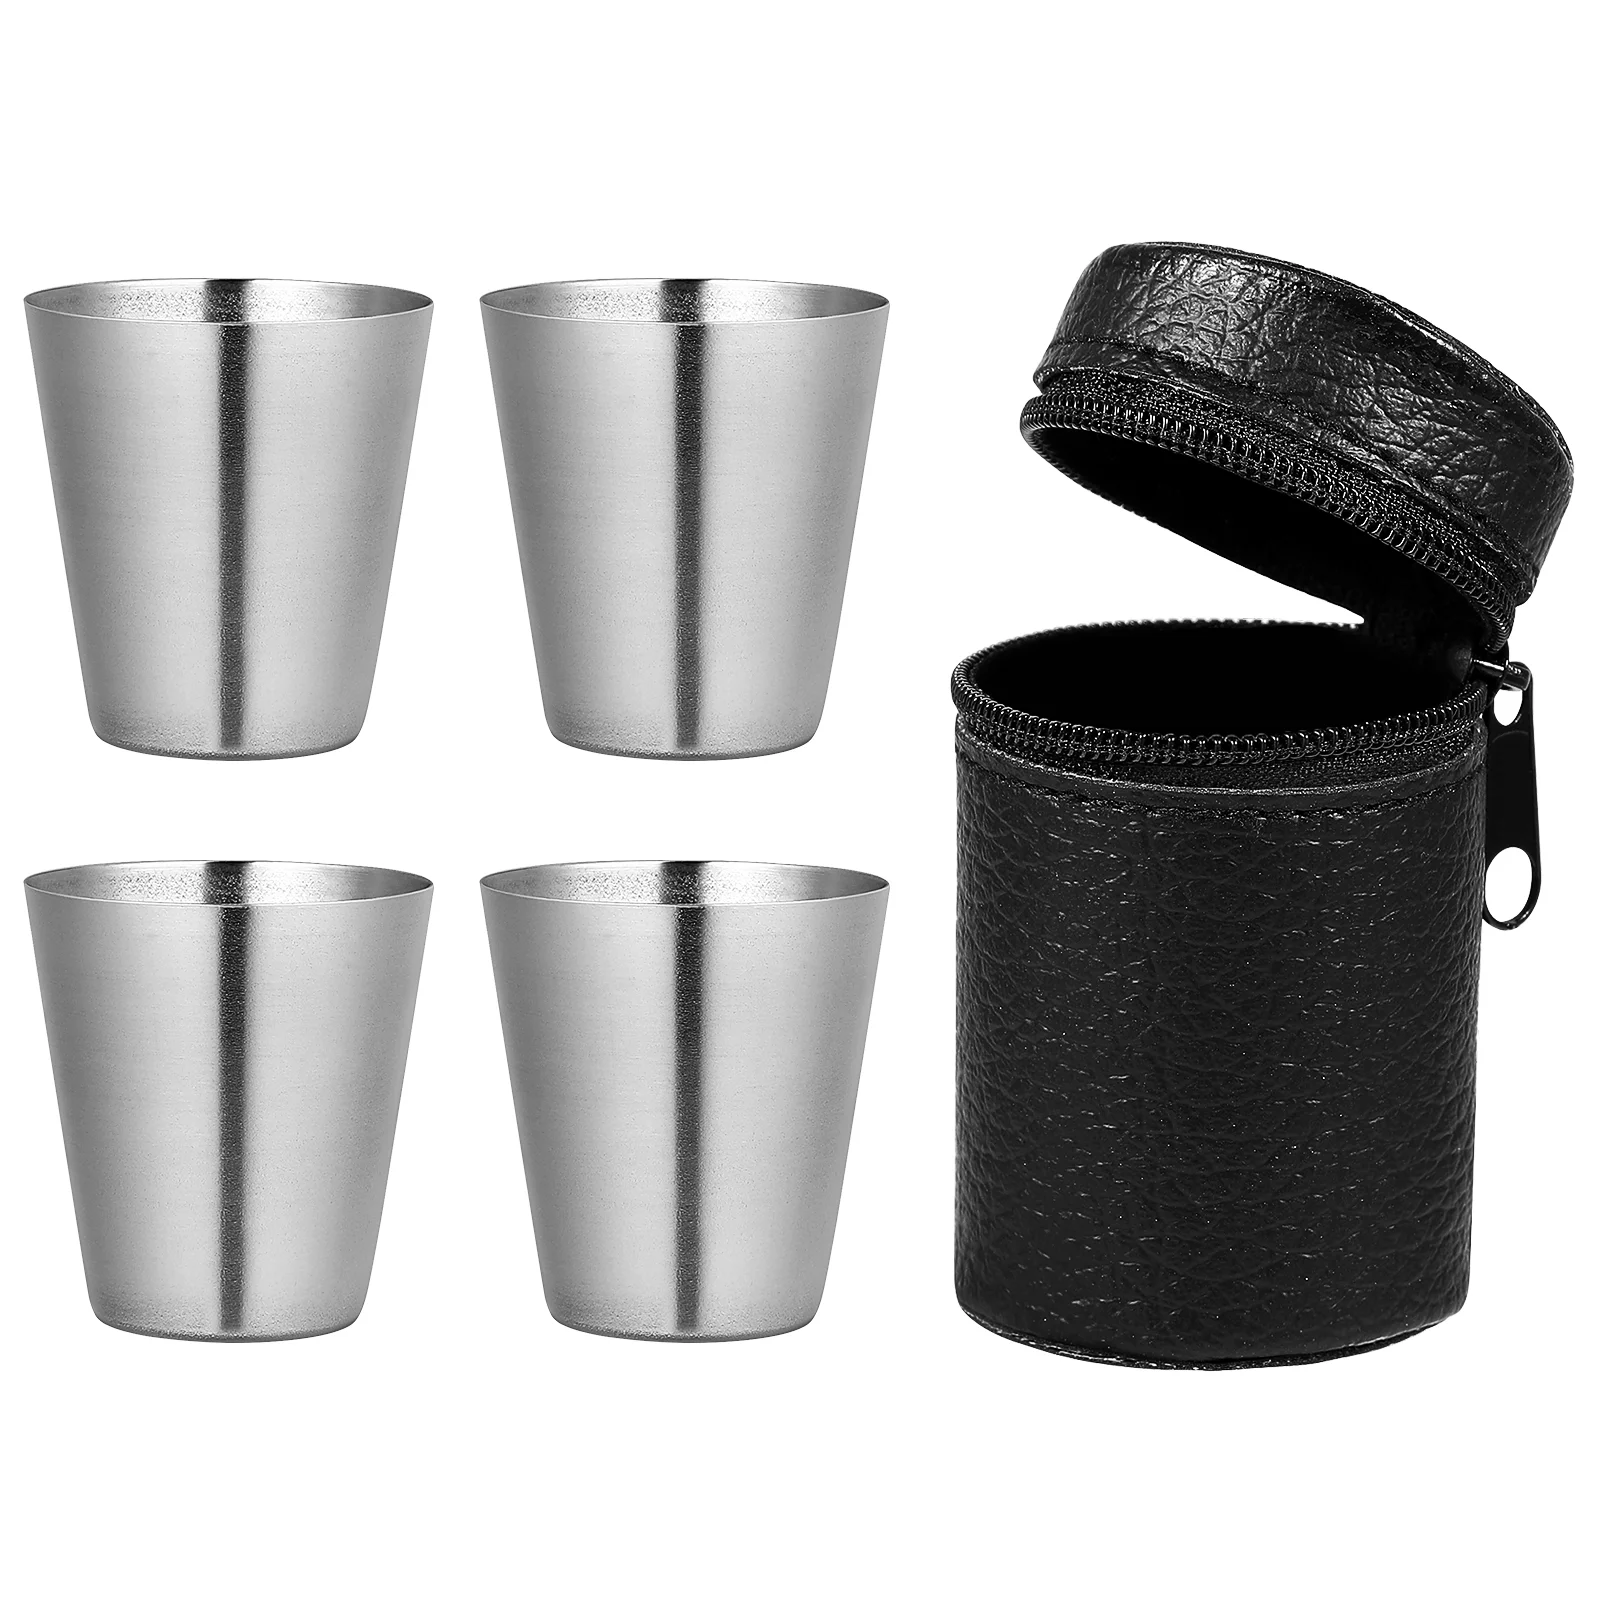 

Shot Tumblers Stainless Glasses Steel Metal Drinking Cup Reusable Travel Beer Mug Silver Bulk Camping Aluminum Home Portable